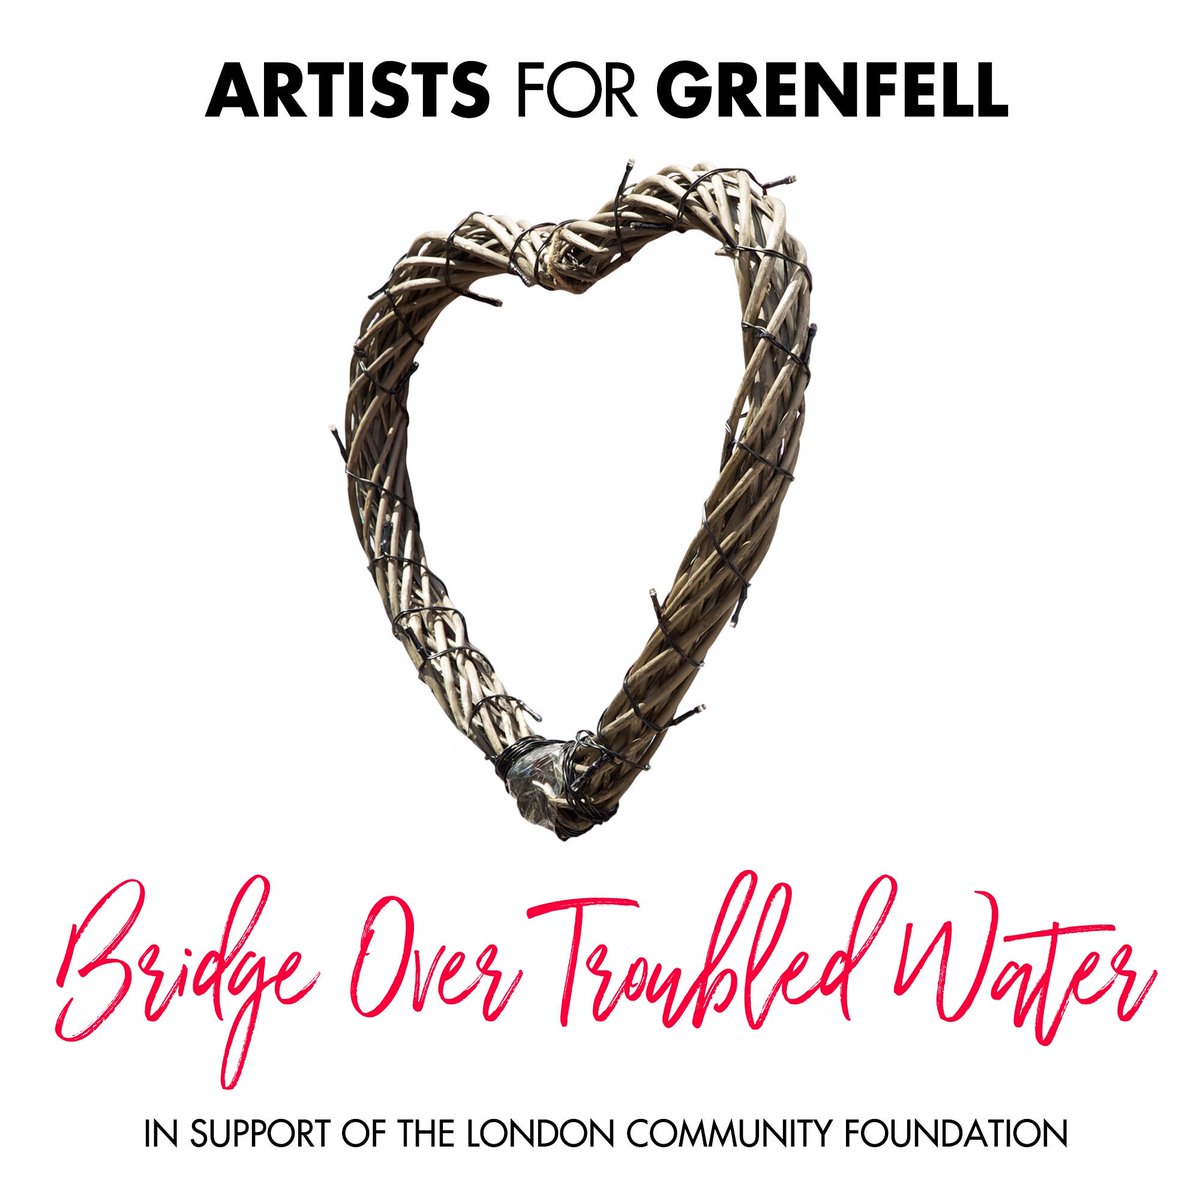 Tomorrow at 8am across major UK radio stations, you will be able to hear Bridge Over Troubled Water. 